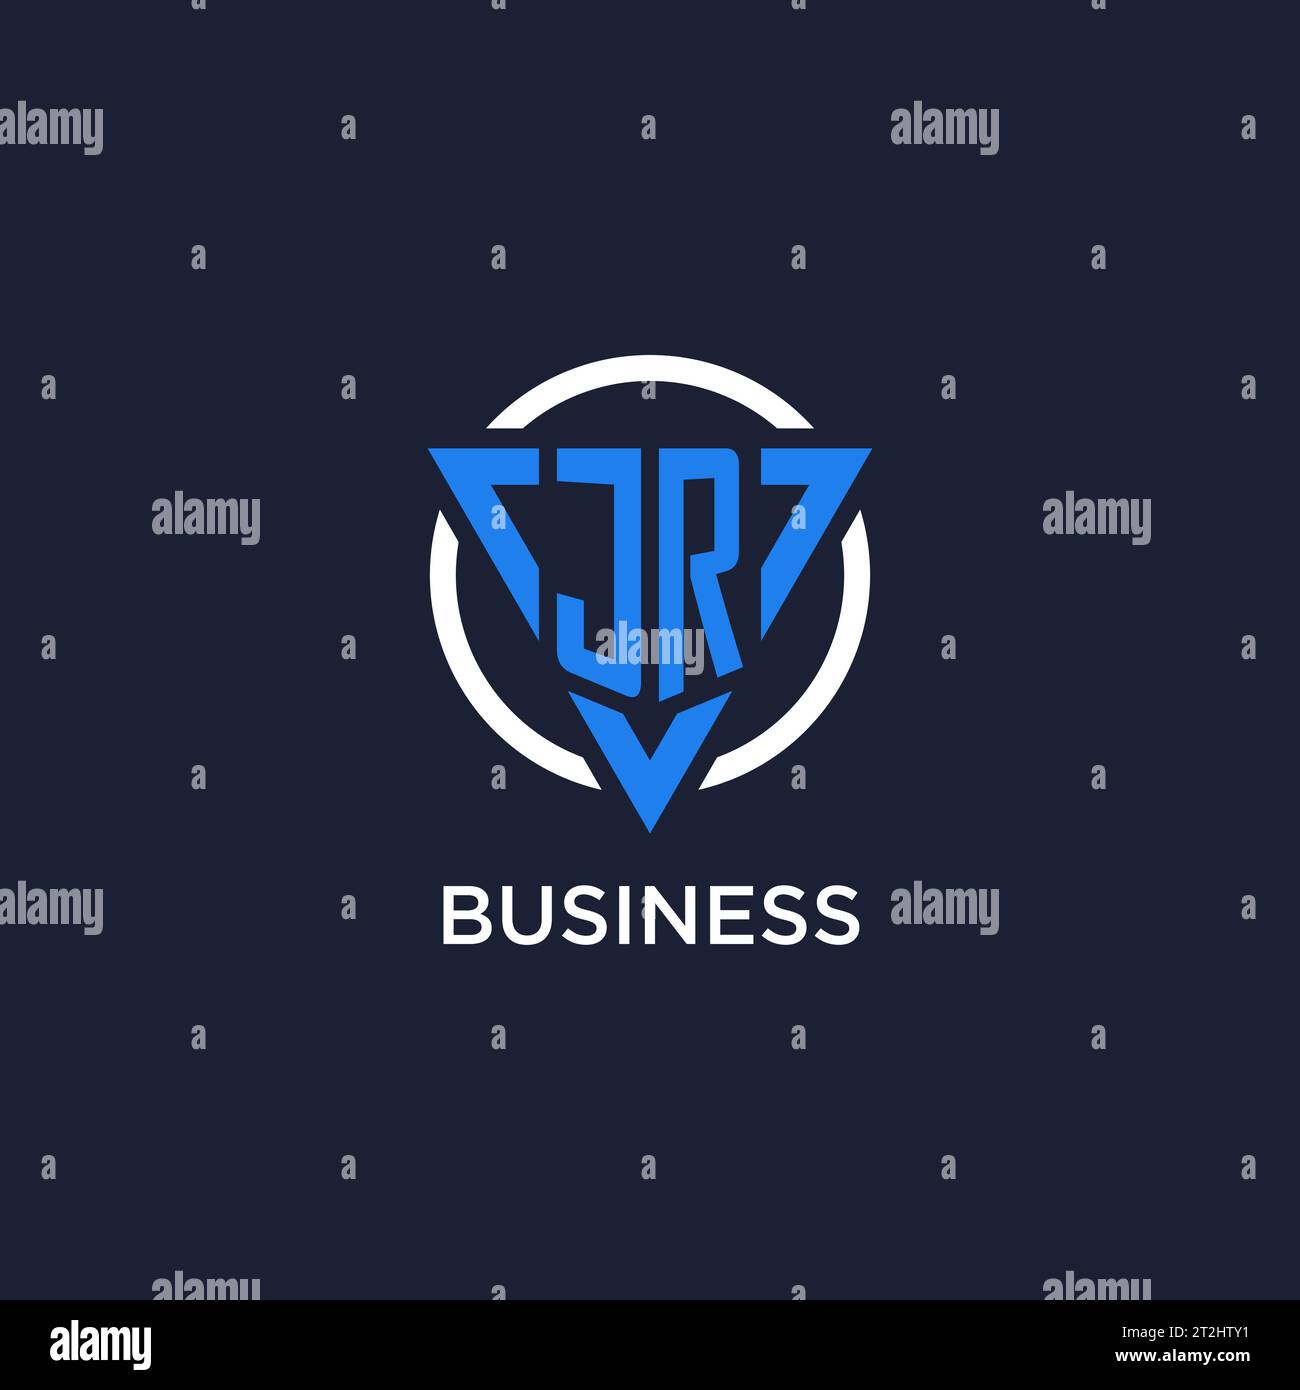 JR monogram logo with triangle shape and circle design vector Stock Vector